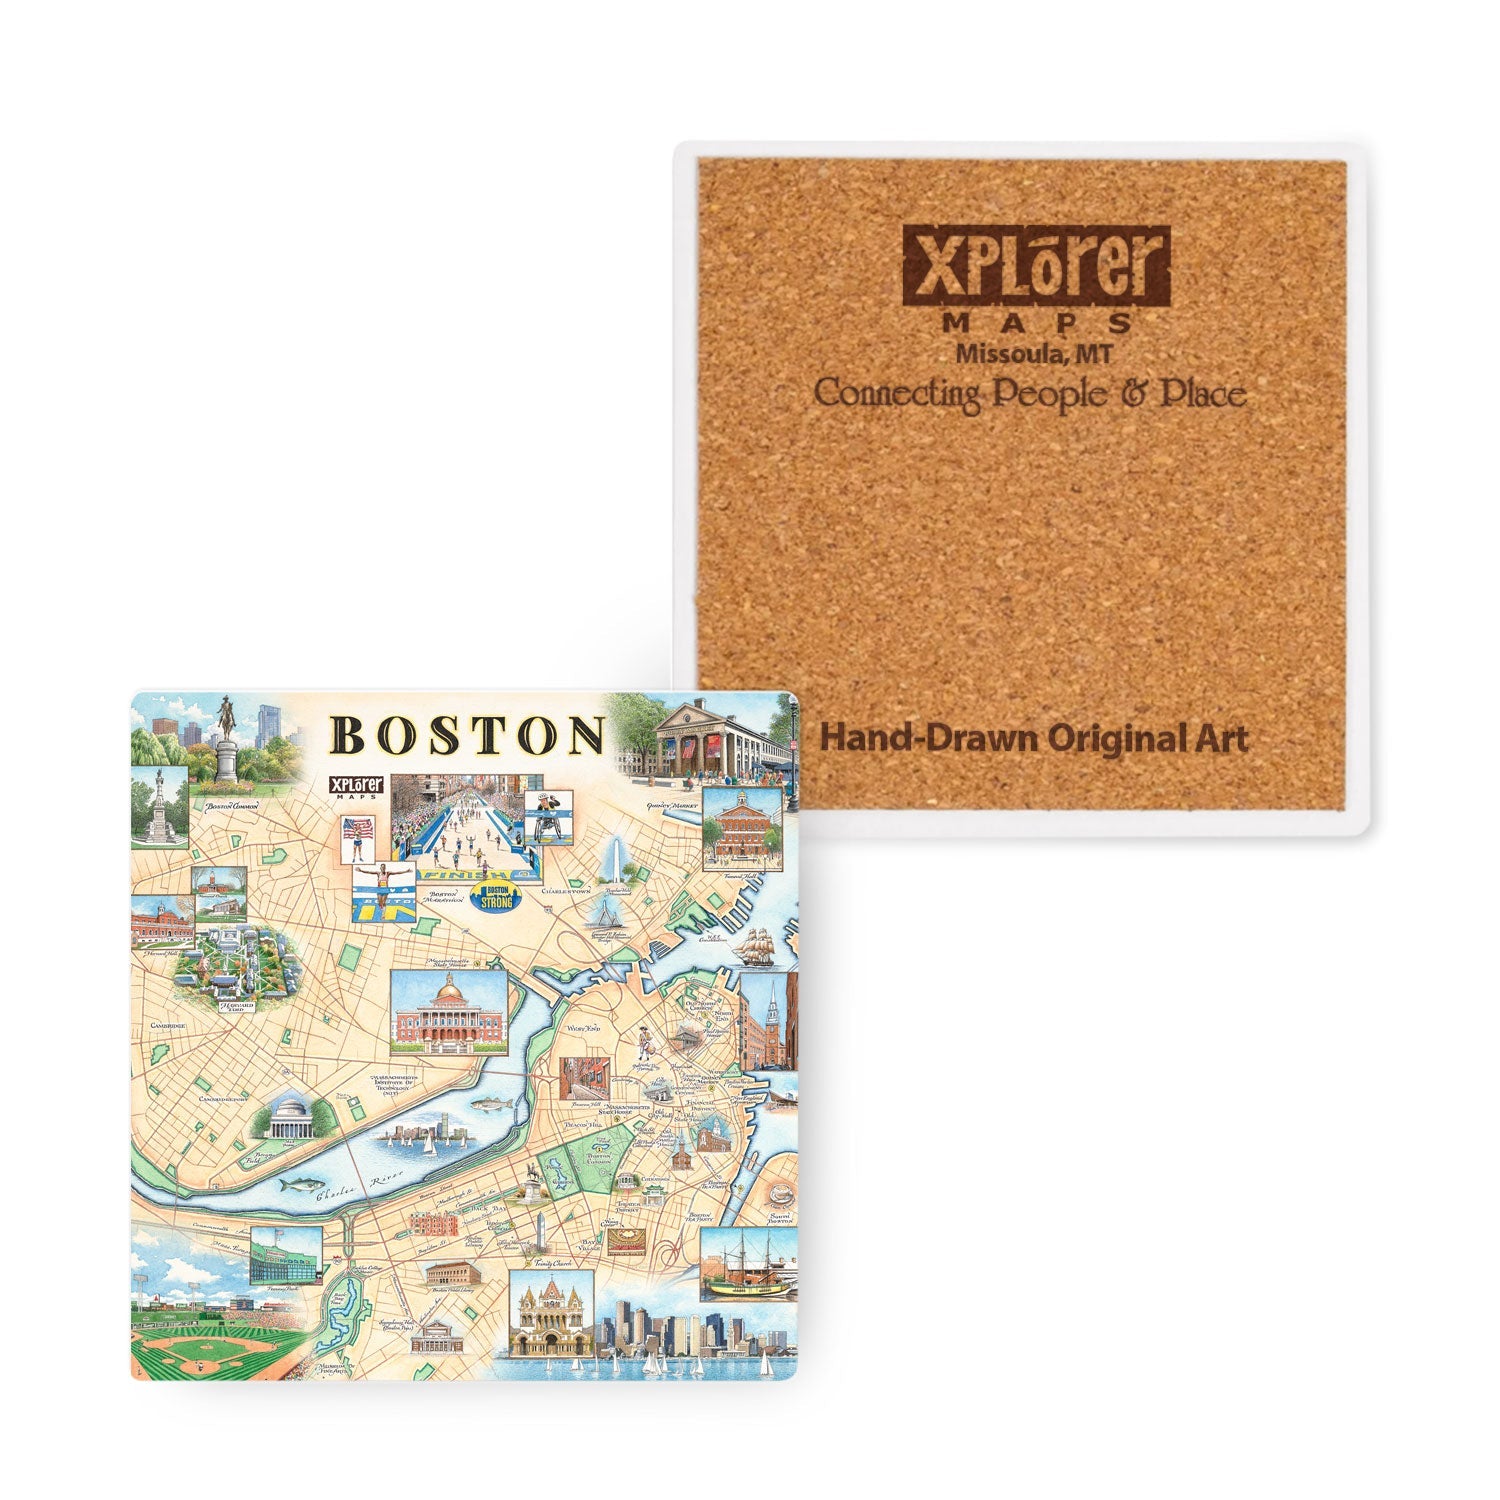 Boston city Map Ceramic coasters in Earth Tone colors. Featuring Boston strong, Boston Marathon, Fenway Park, Museum of Fine Arts, Massachusetts State House, Bunker Hill Monument.